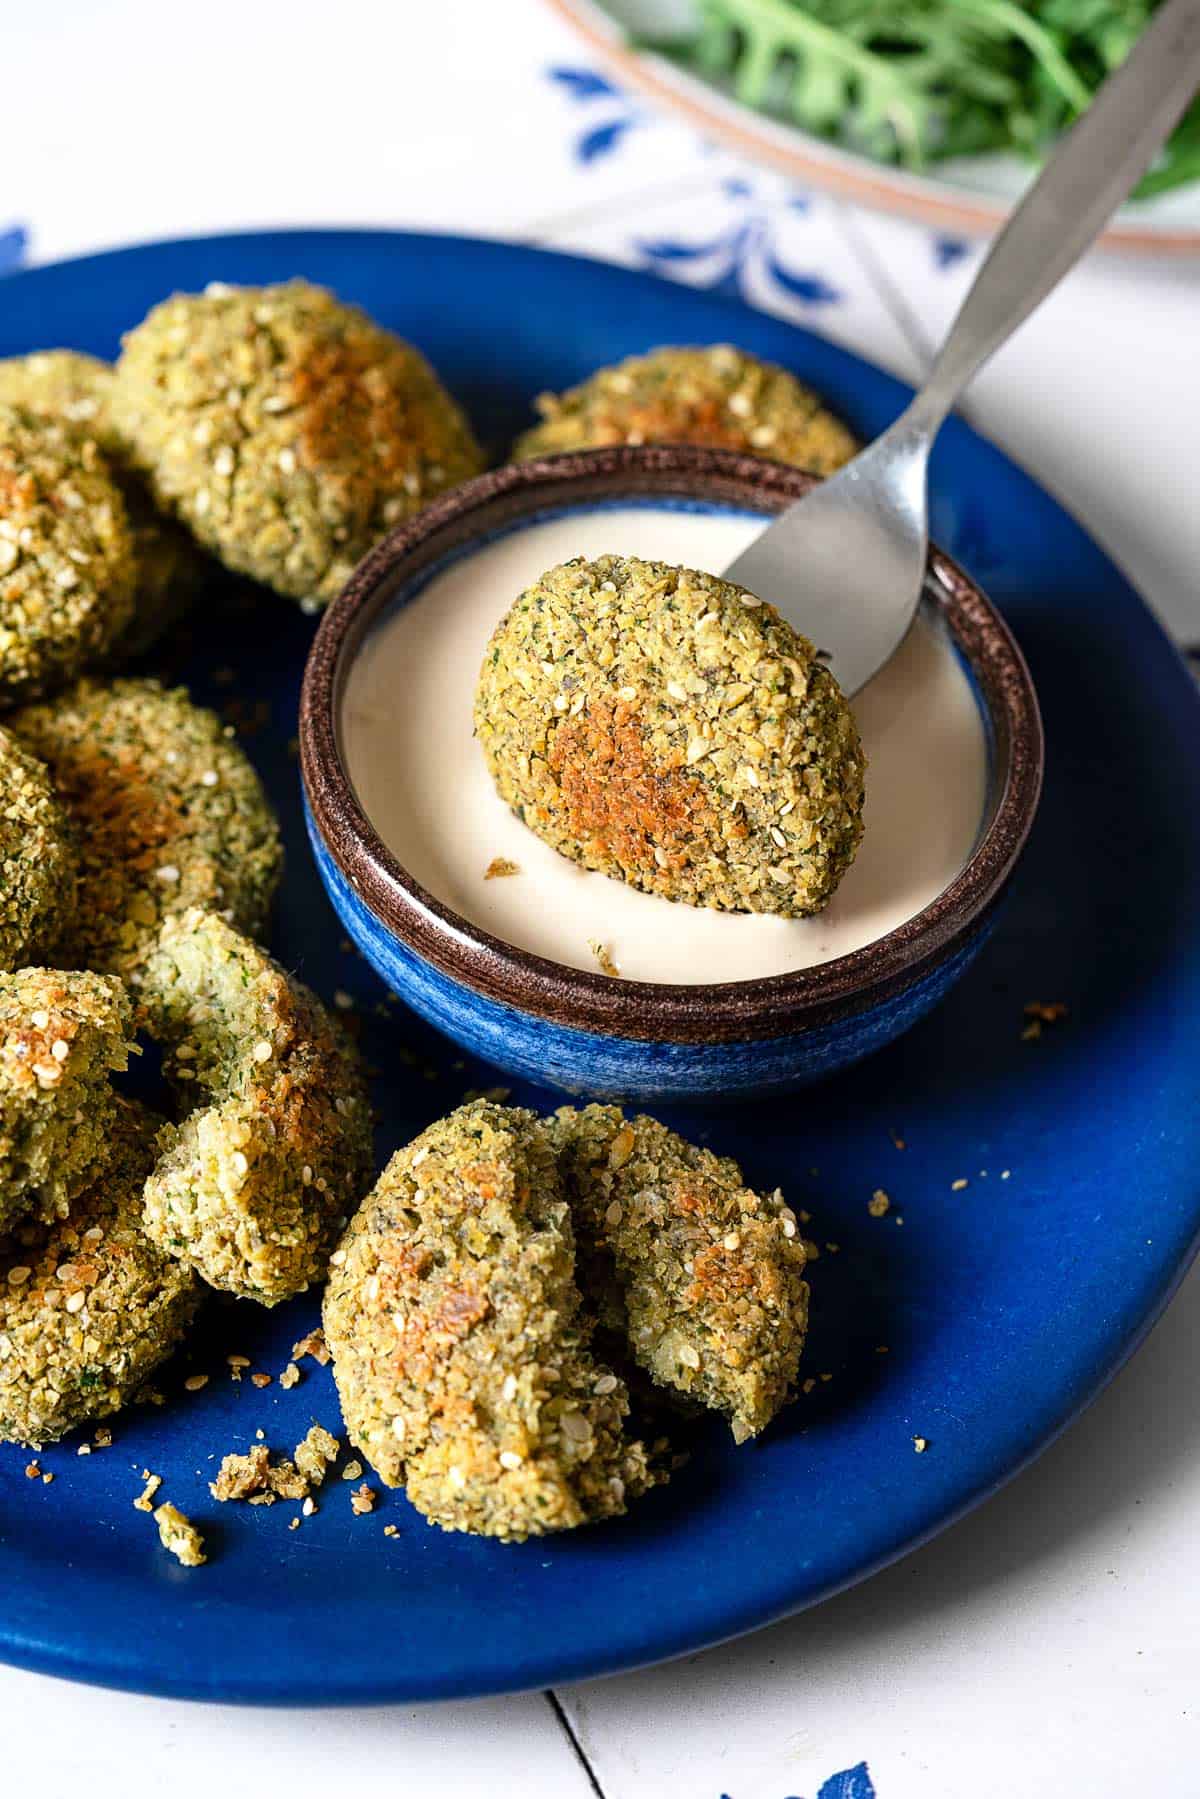 a baked falafel being dipped into a small bowl of tahini sauce on a plate filled with baked falafel.